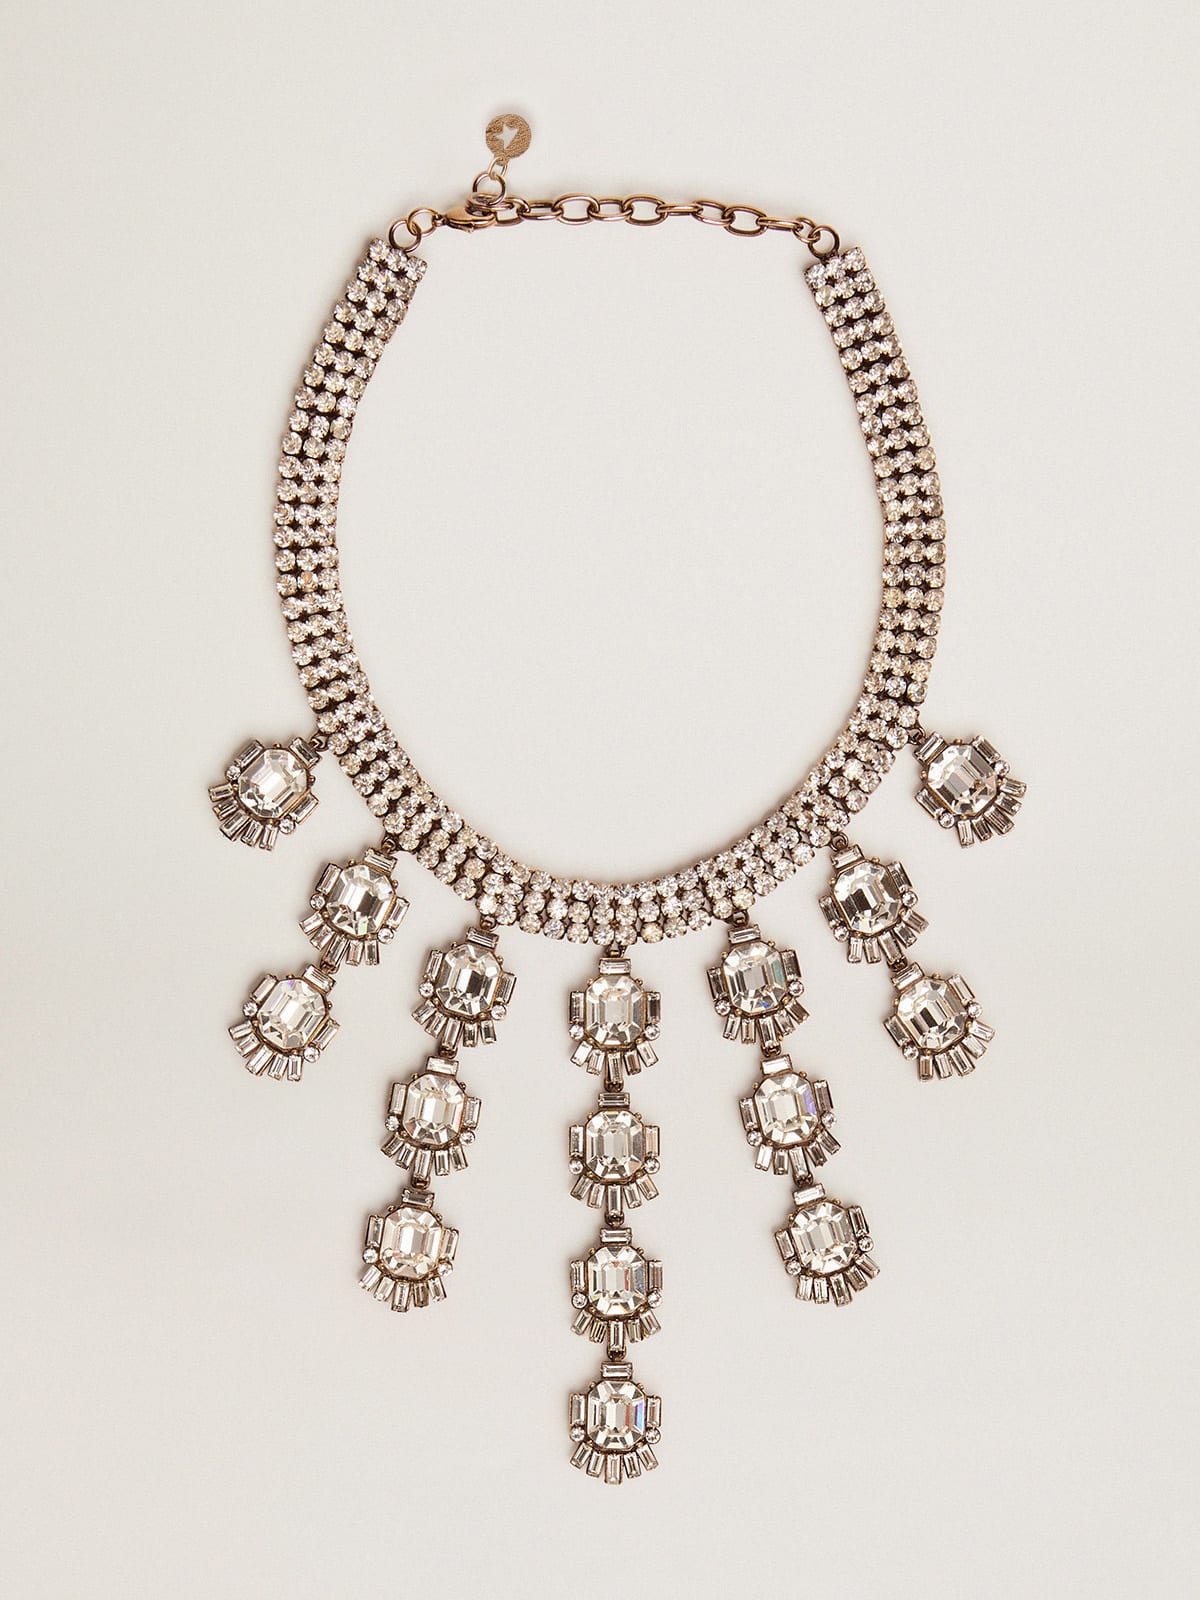 Dco Jewelmates Collection necklace in old gold color with baguette-shaped drop crystals